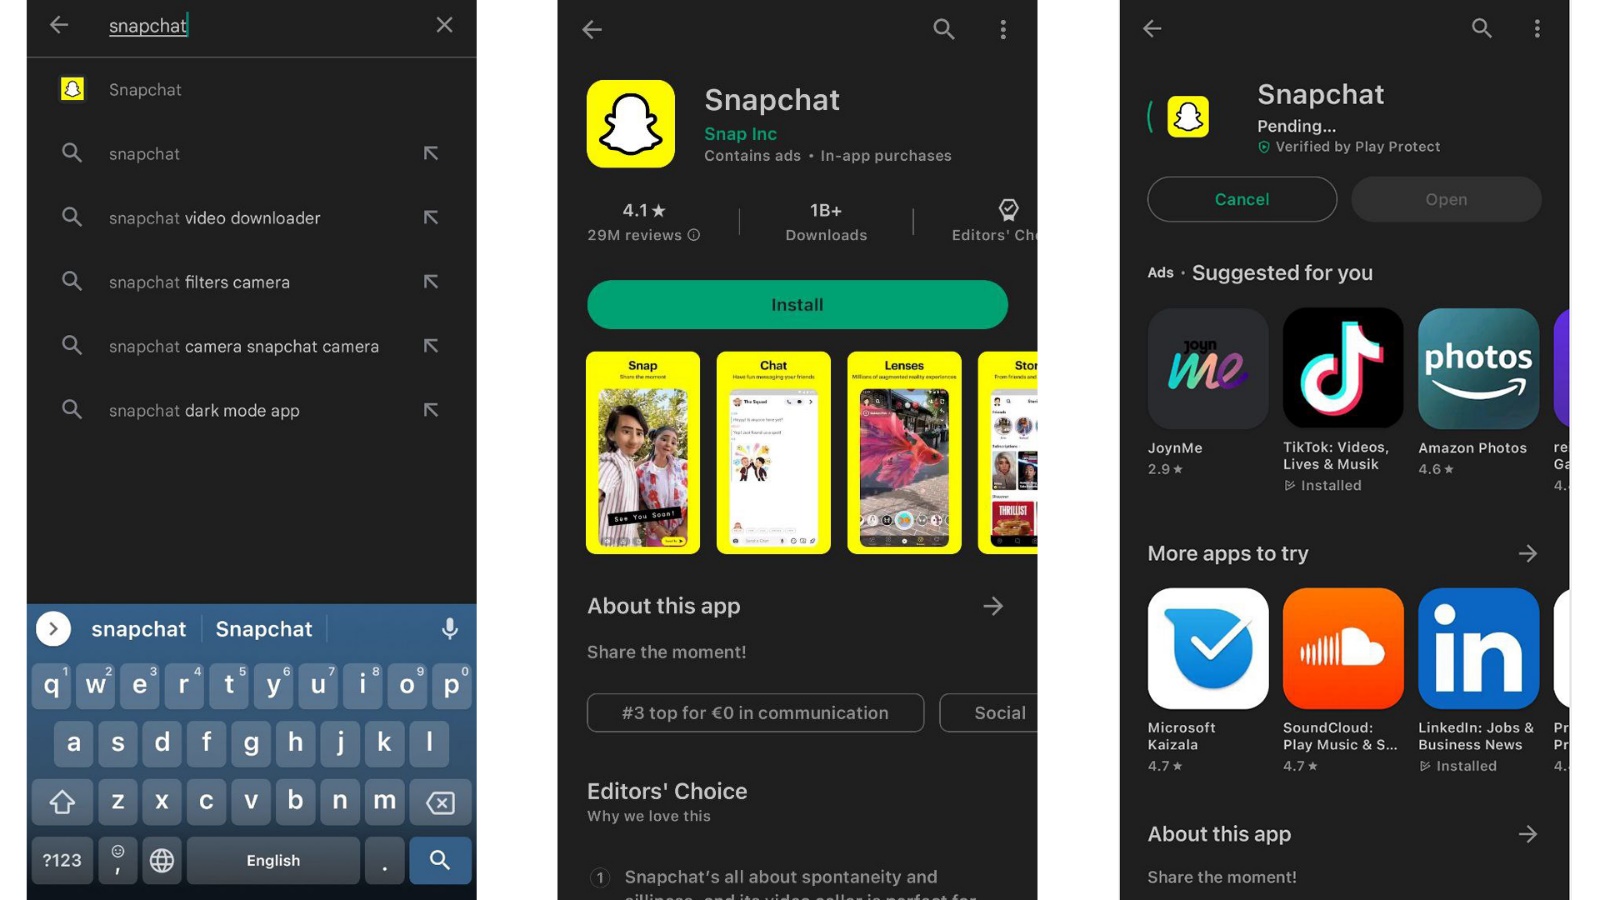 Steps to install Snapchat on Google Play Android